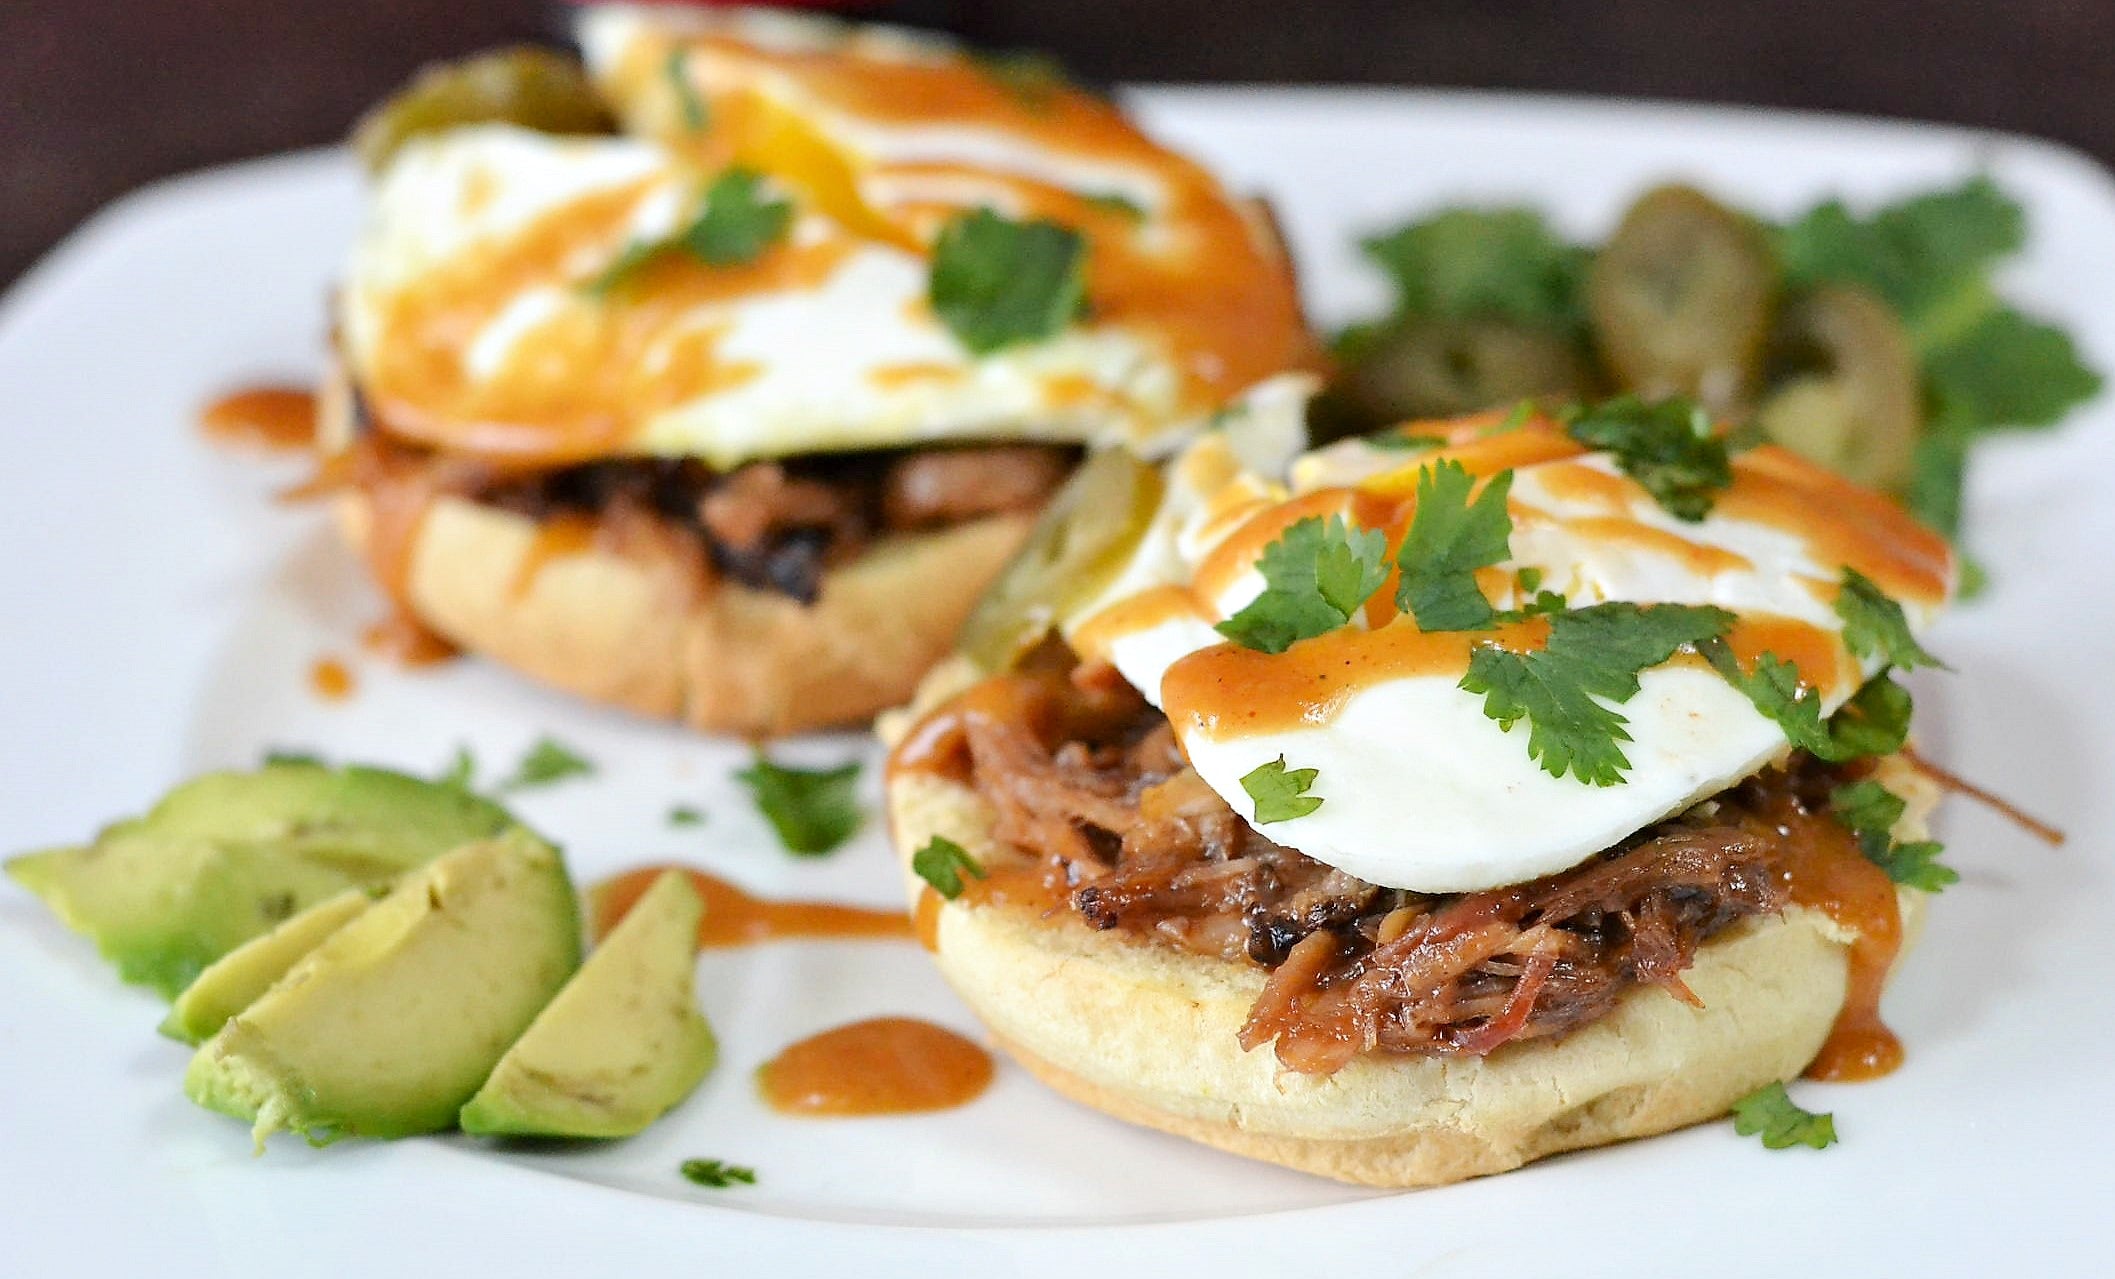 BARBECUE PULLED PORK EGGS BENEDICT